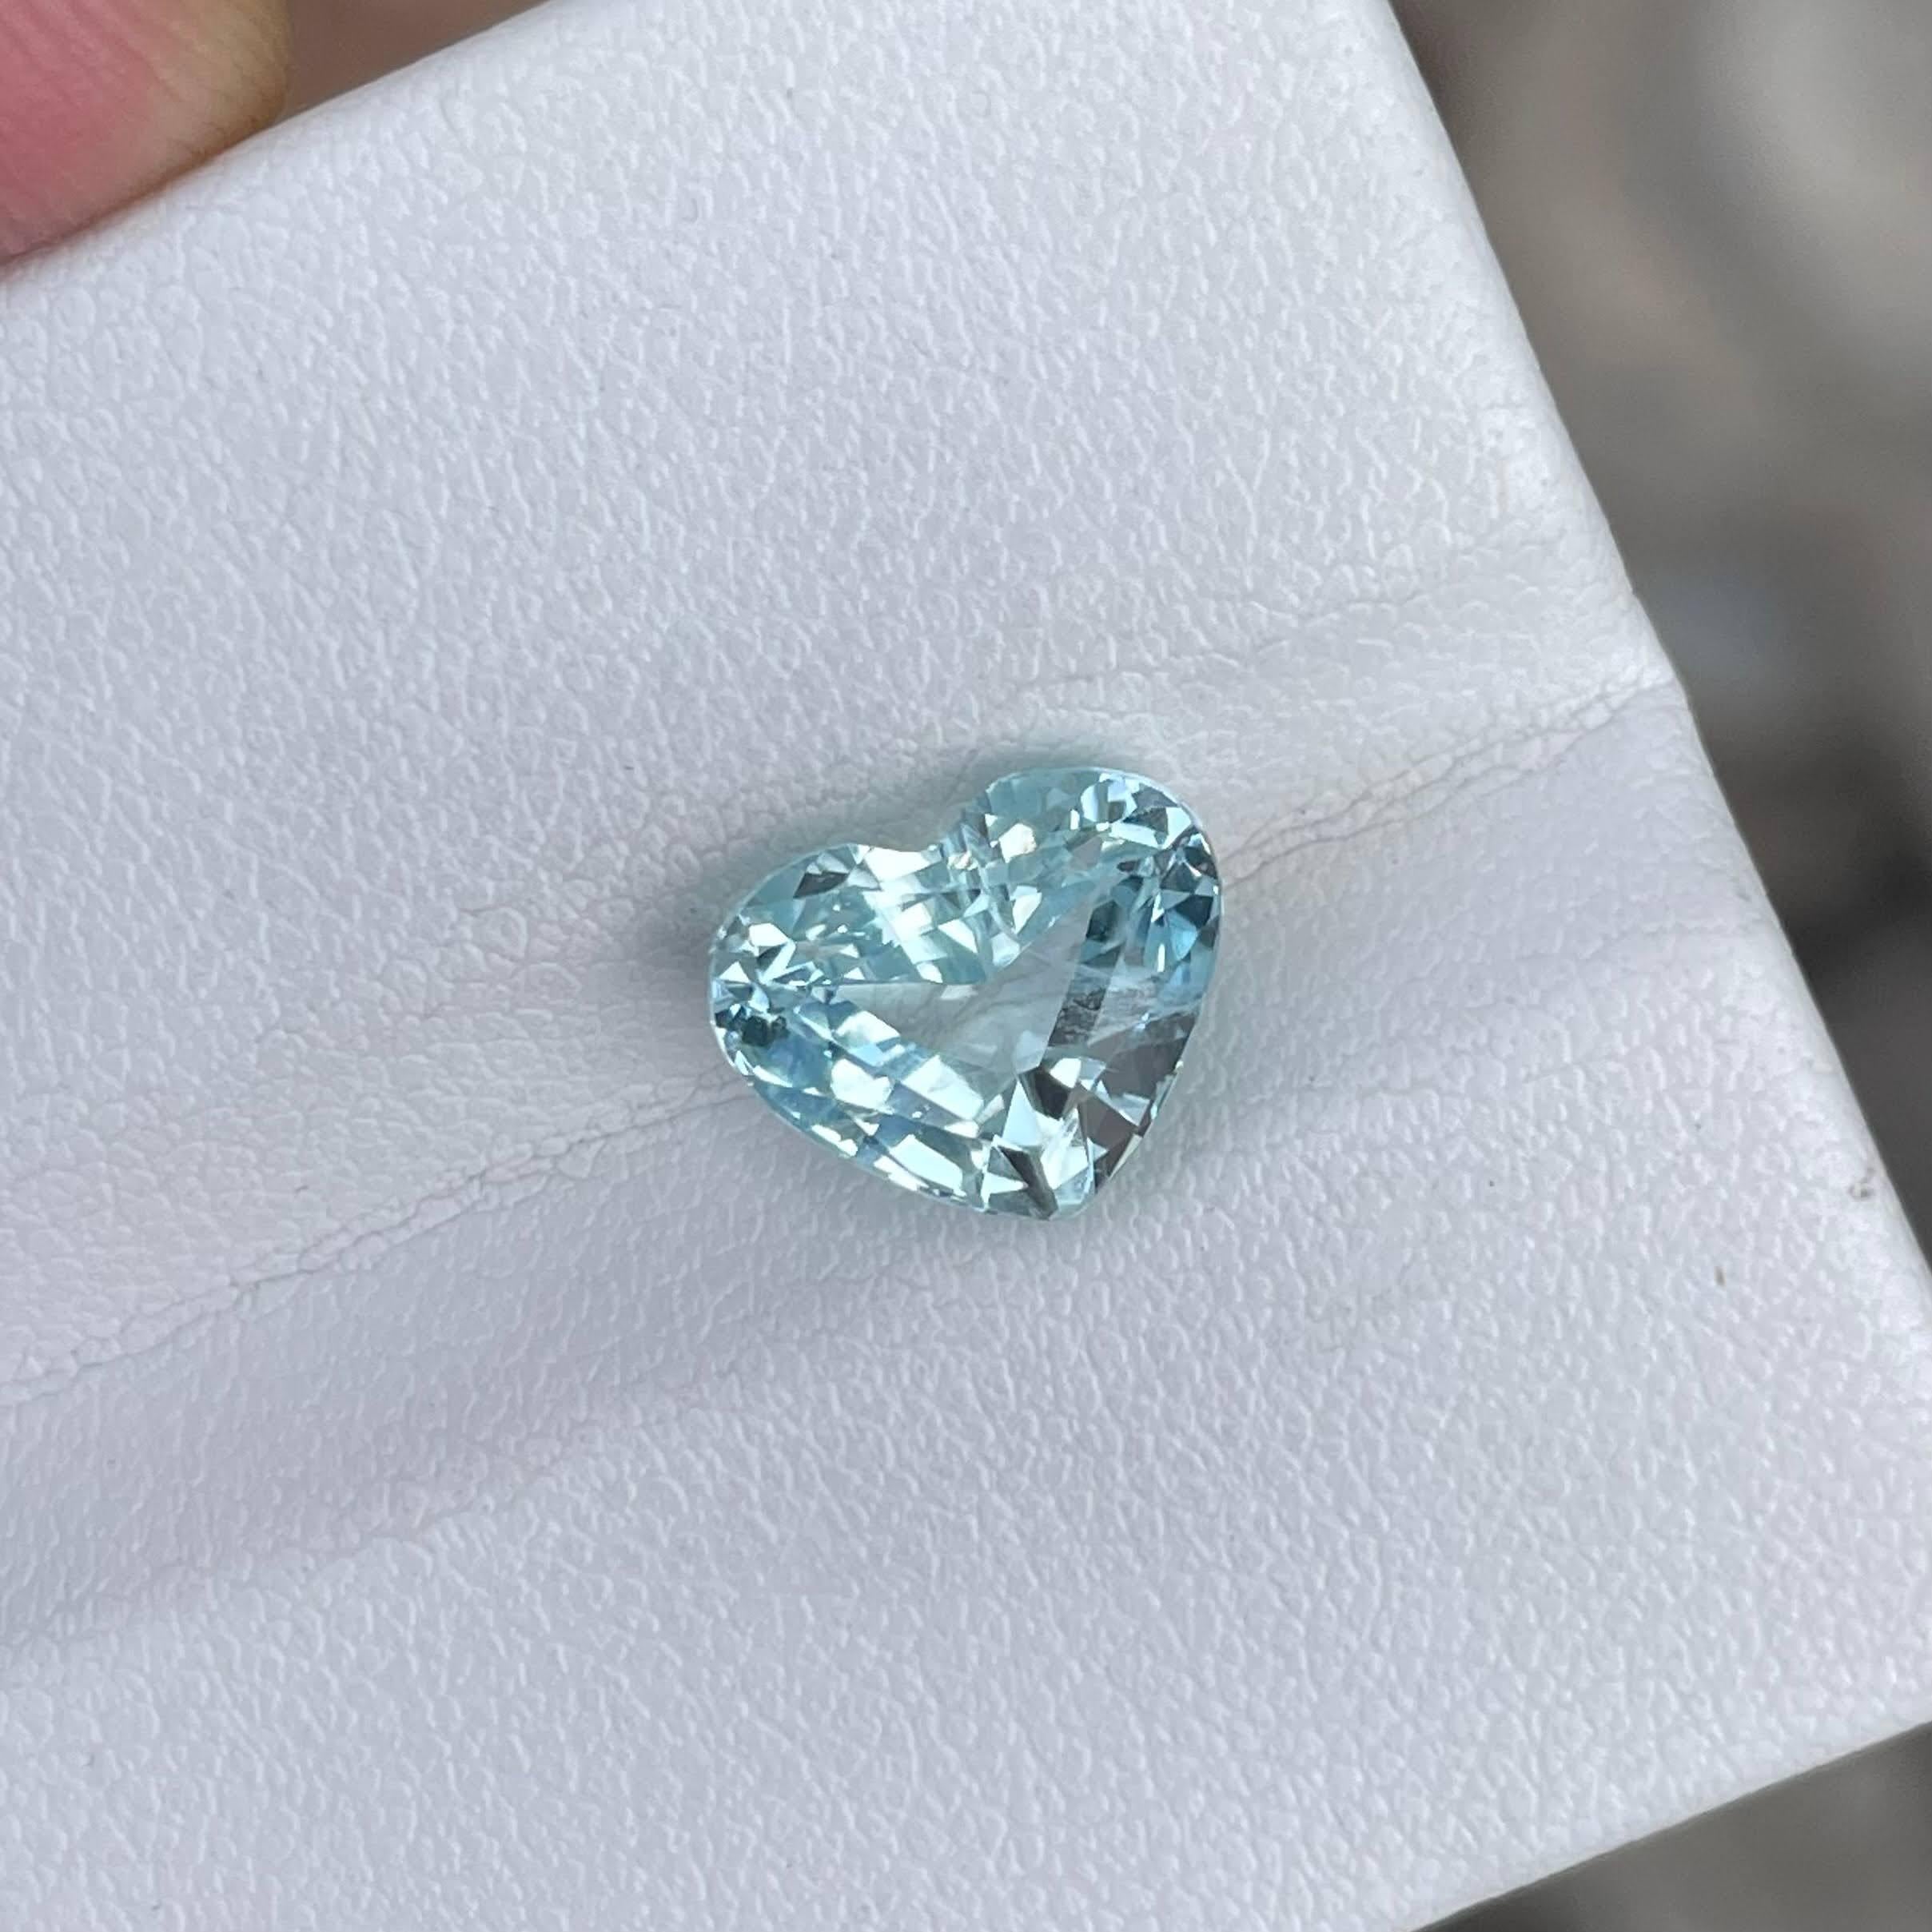 Weight 3.10 carats 
Dimensions 8.45x10.27x6.40 mm
Treatment none 
Origin Pakistan 
Clarity VVS 
Shape heart 
Cut heart 




The 3.10-carat Blue Aquamarine Stone is a mesmerizing and naturally radiant gem sourced from the rich gemstone mines of